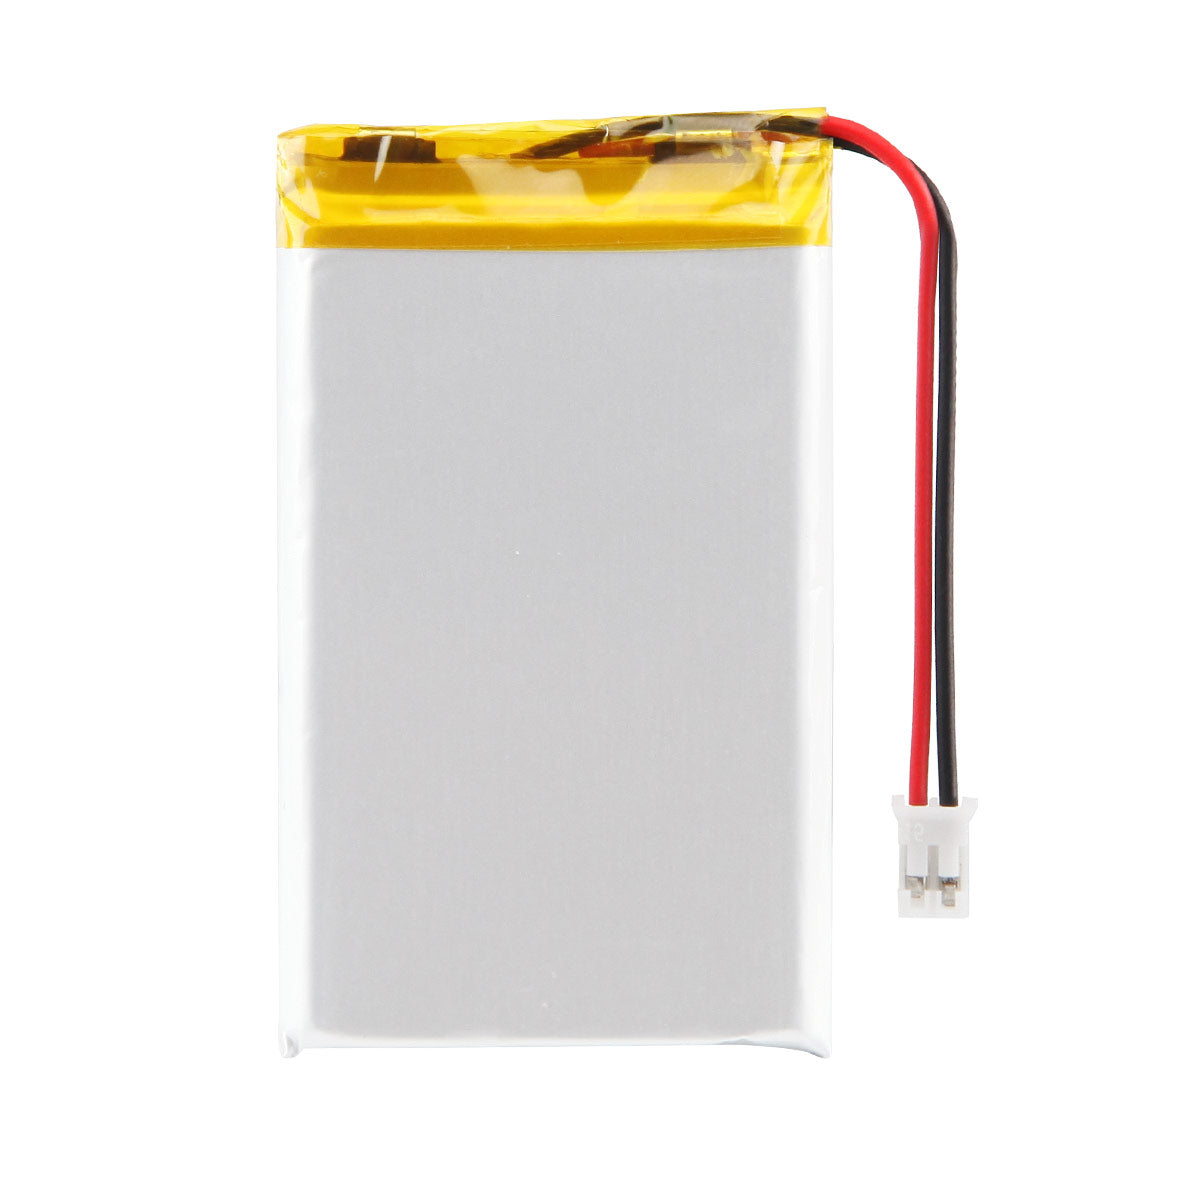 Batterie lithium polymère rechargeable YDL 3.7V 2800mAh 704070/804070